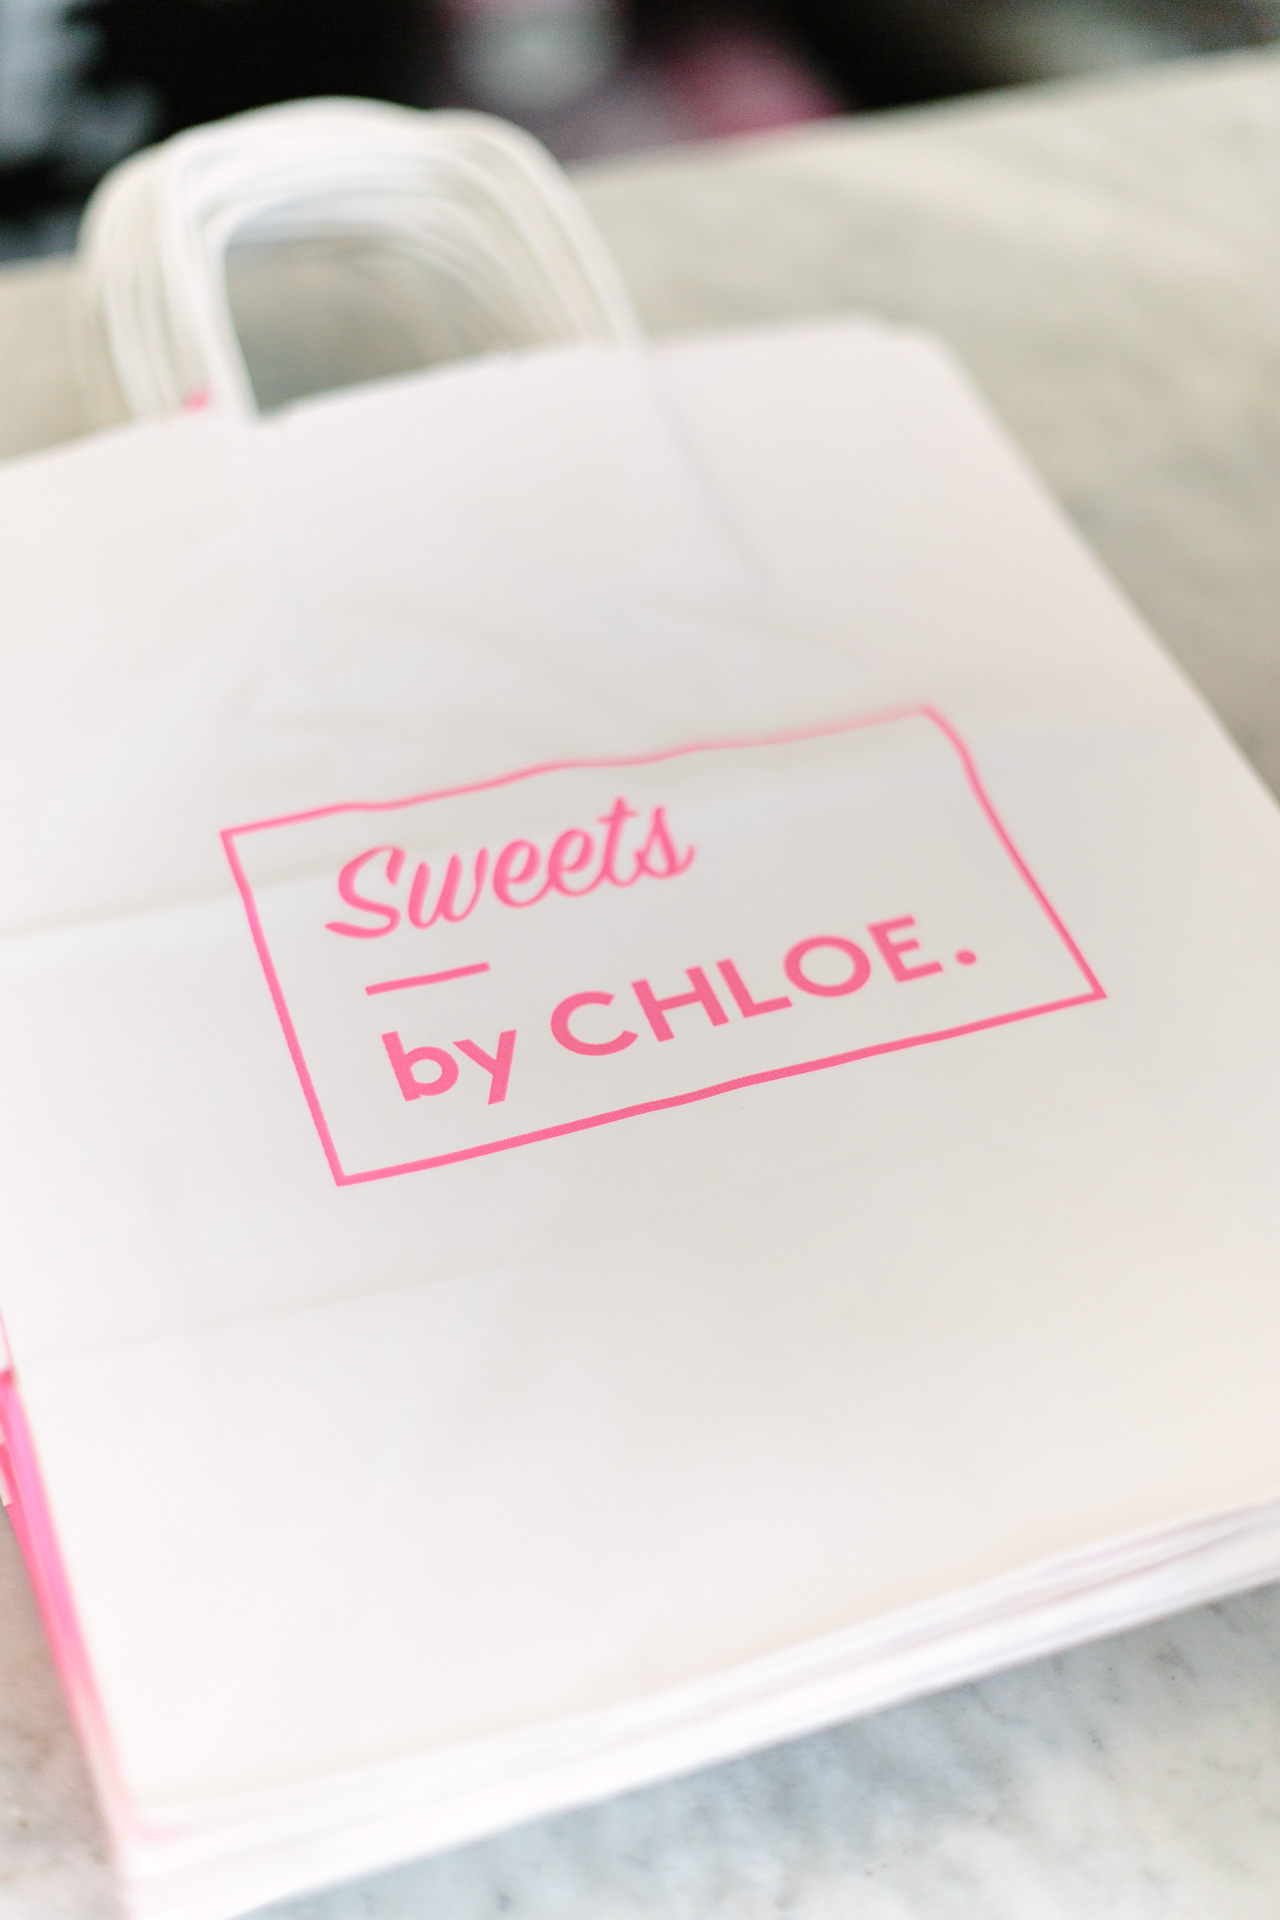 Sweets by Chloe